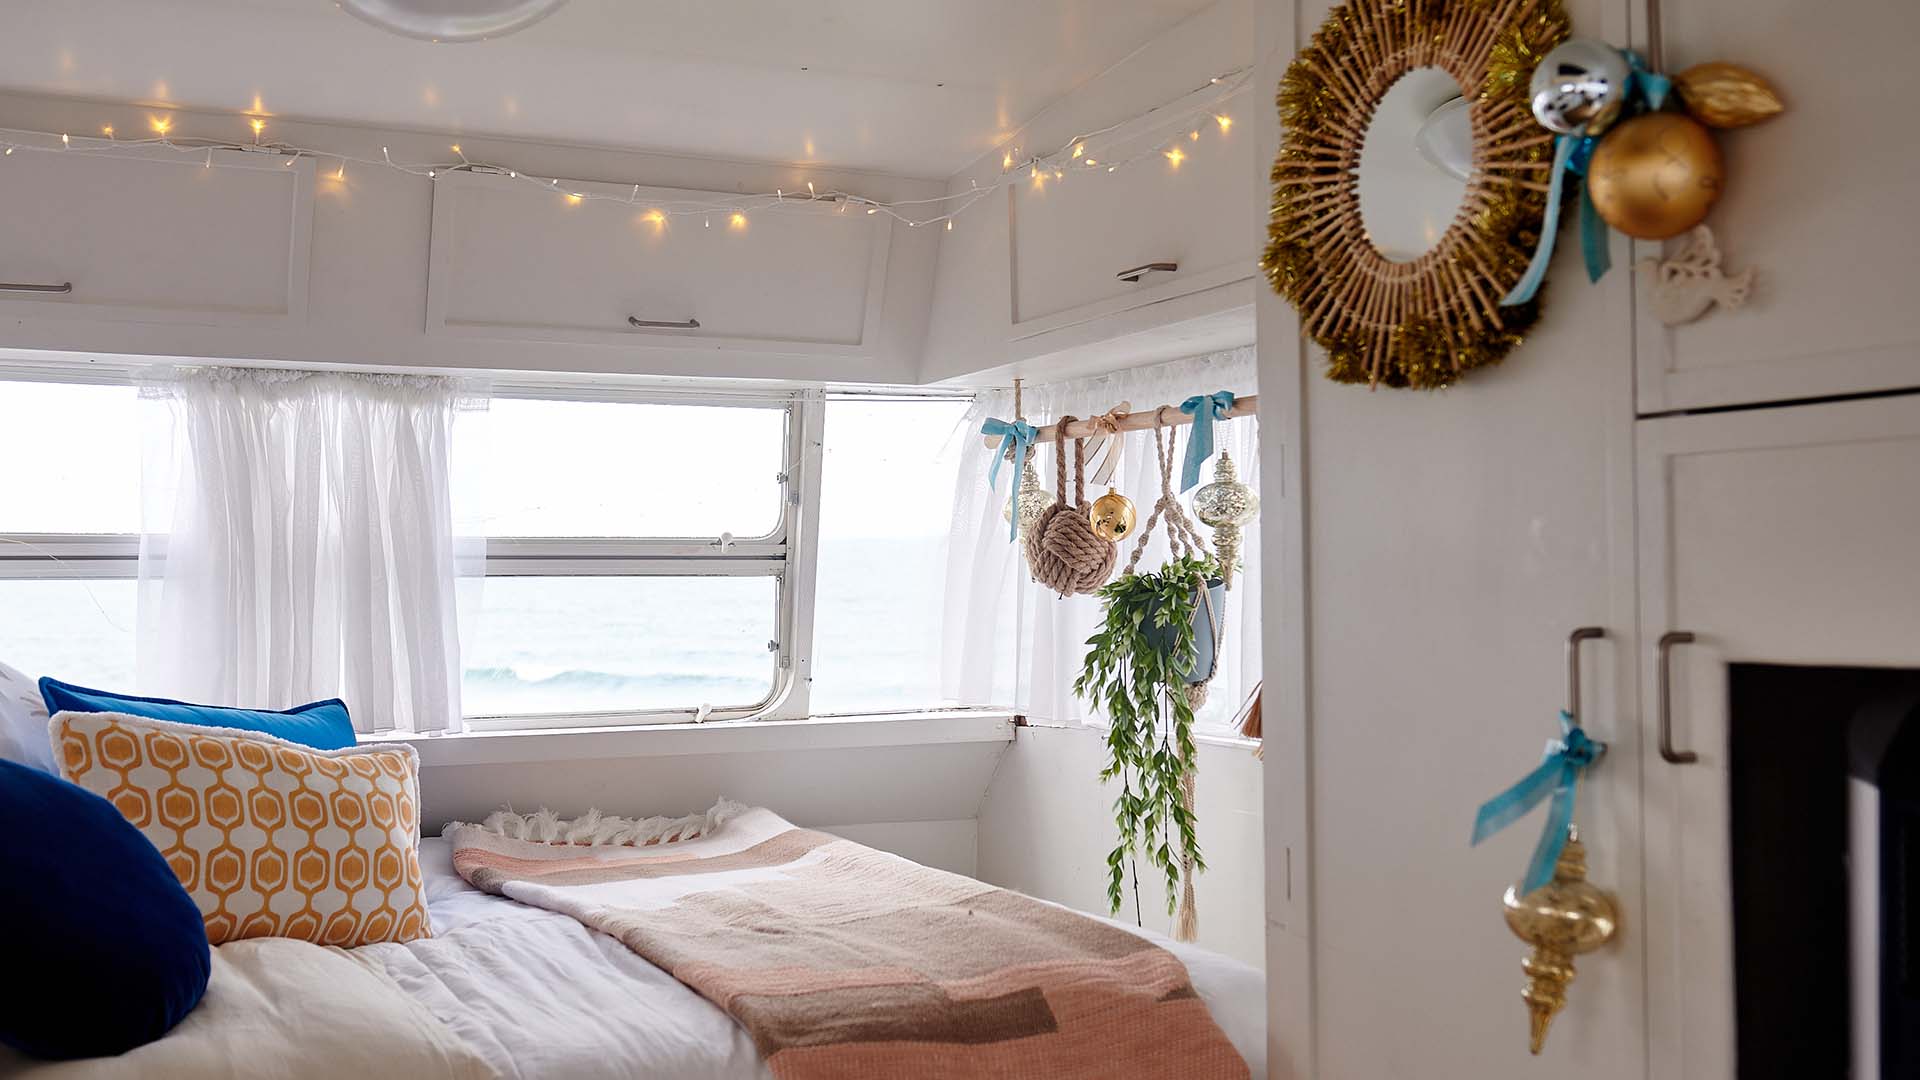 You Can Now Book a Festive Getaway in a Christmas-Themed Caravan in Three NSW Holiday Spots